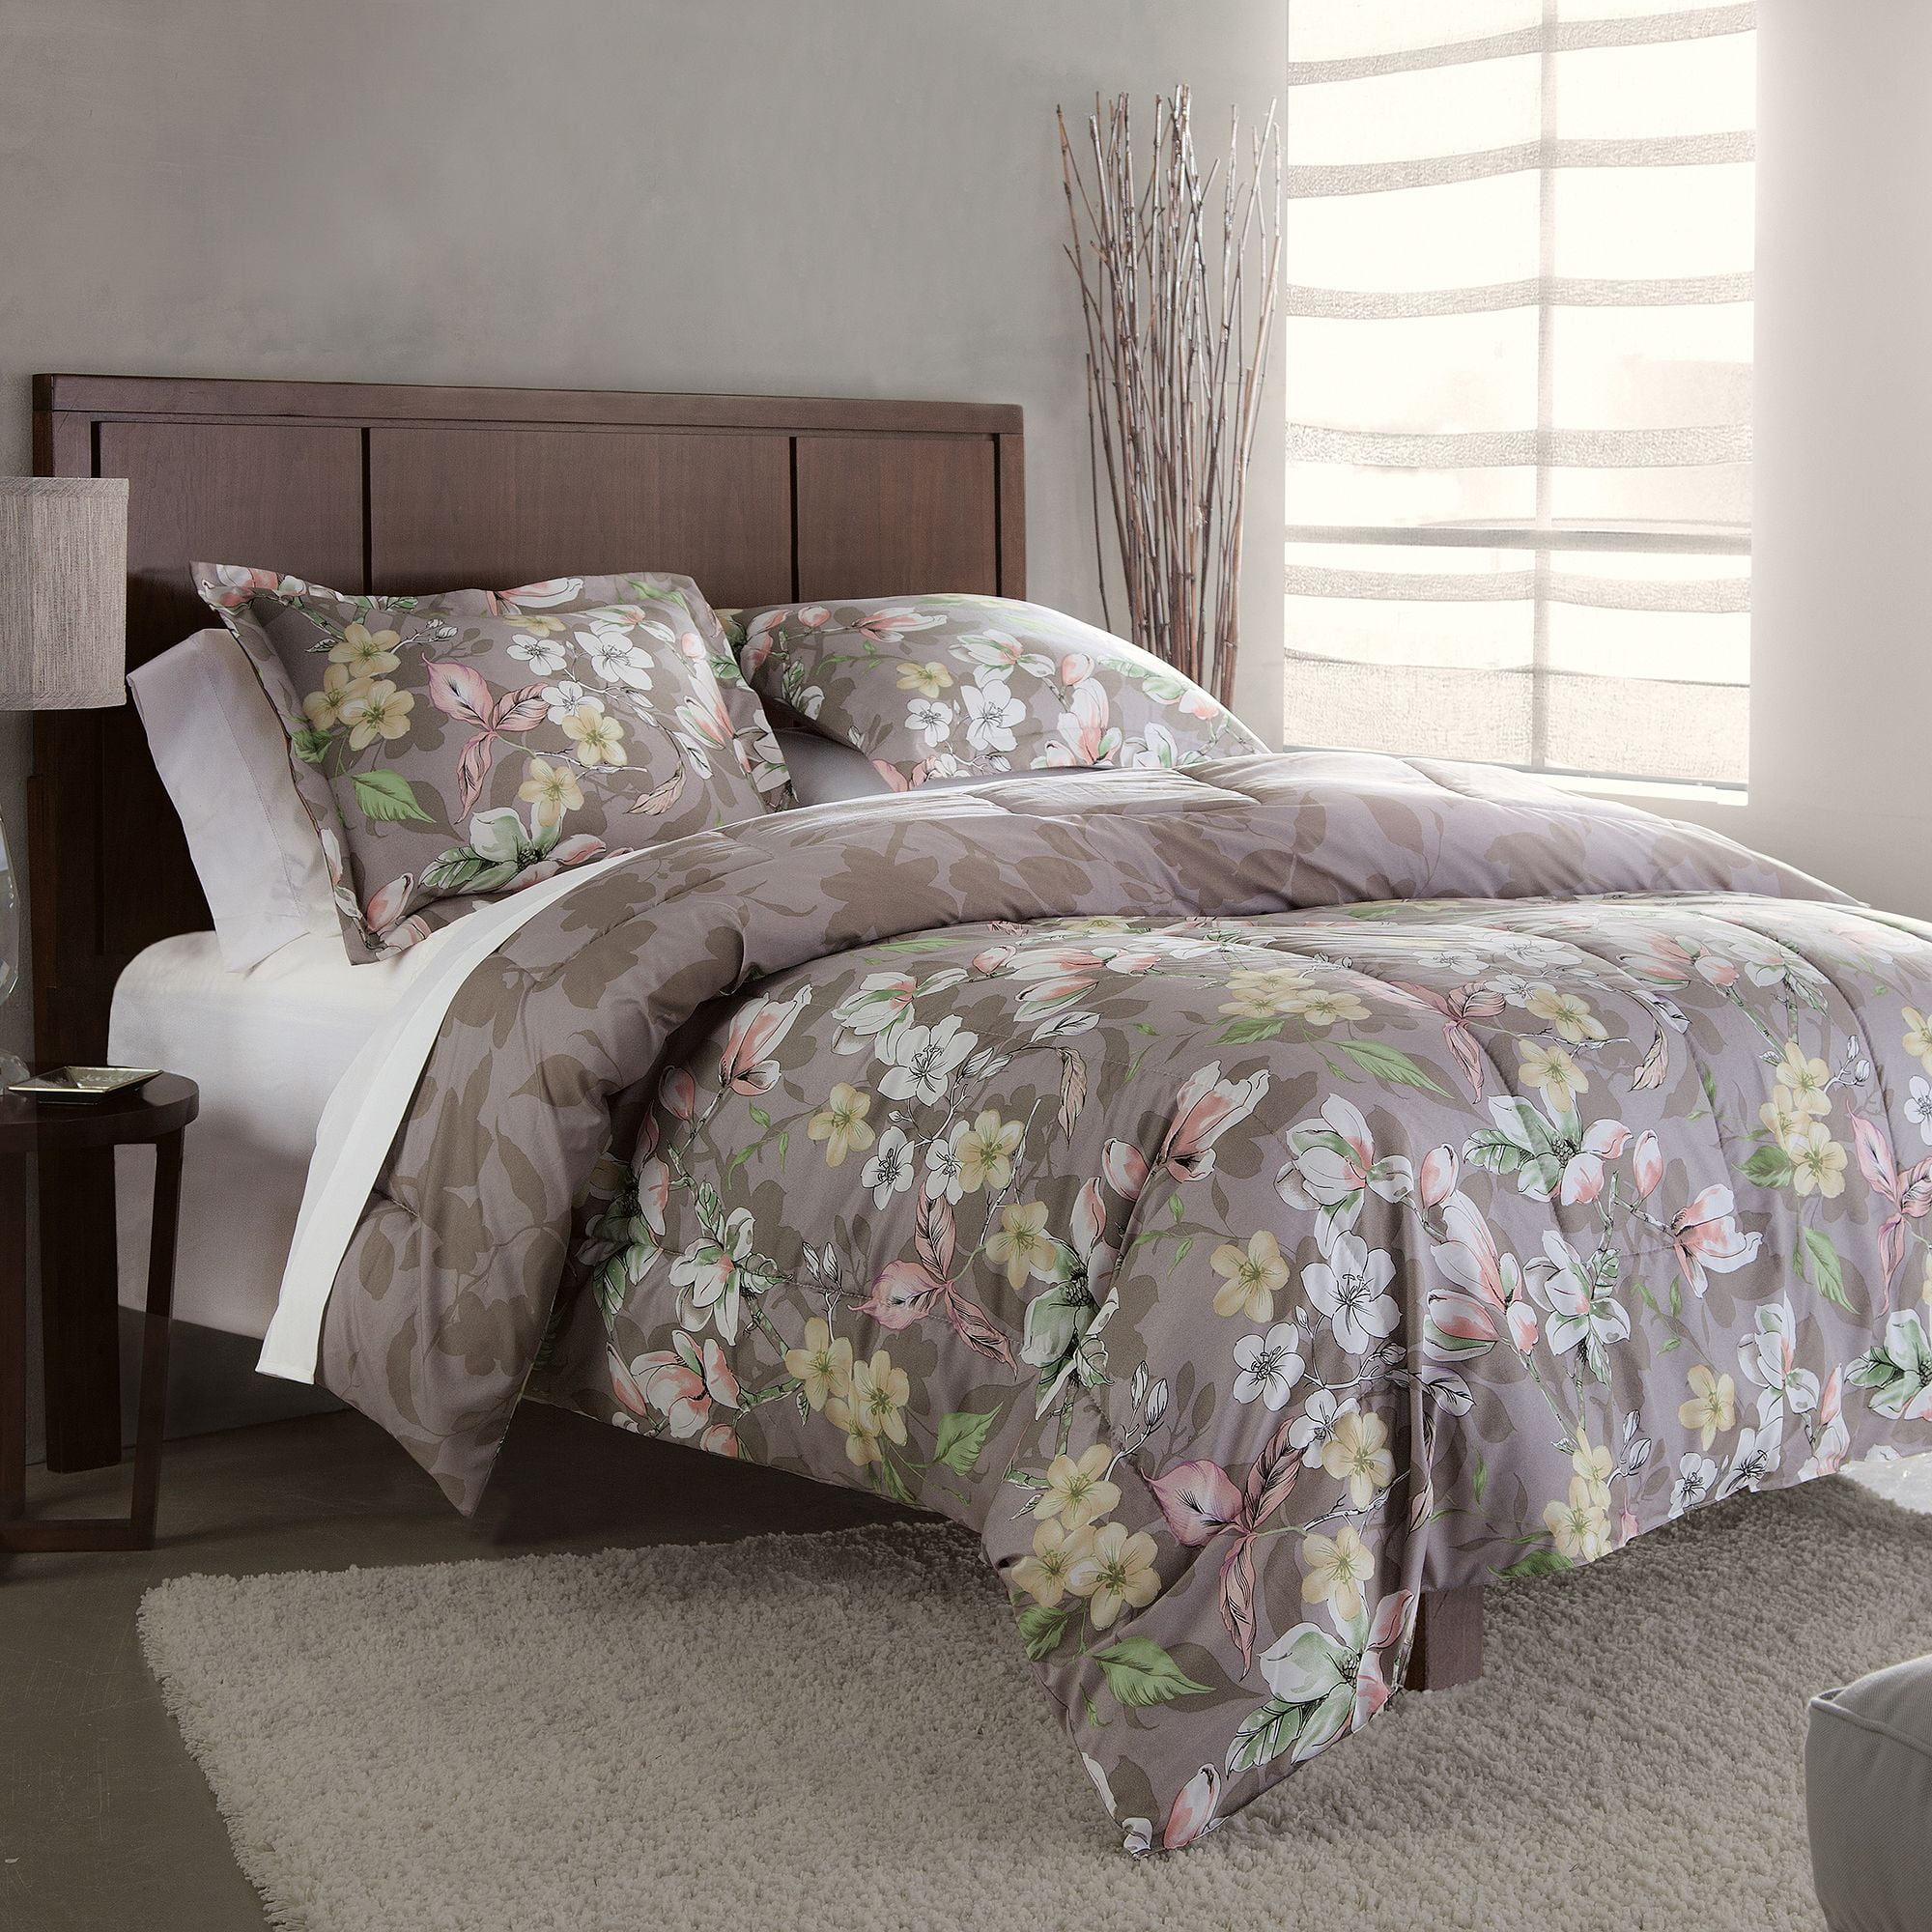 Divatex Home Fashions Natalie Bedding Comforter Set Gray in Awesome Divatex Home Fashions Comforter you should look